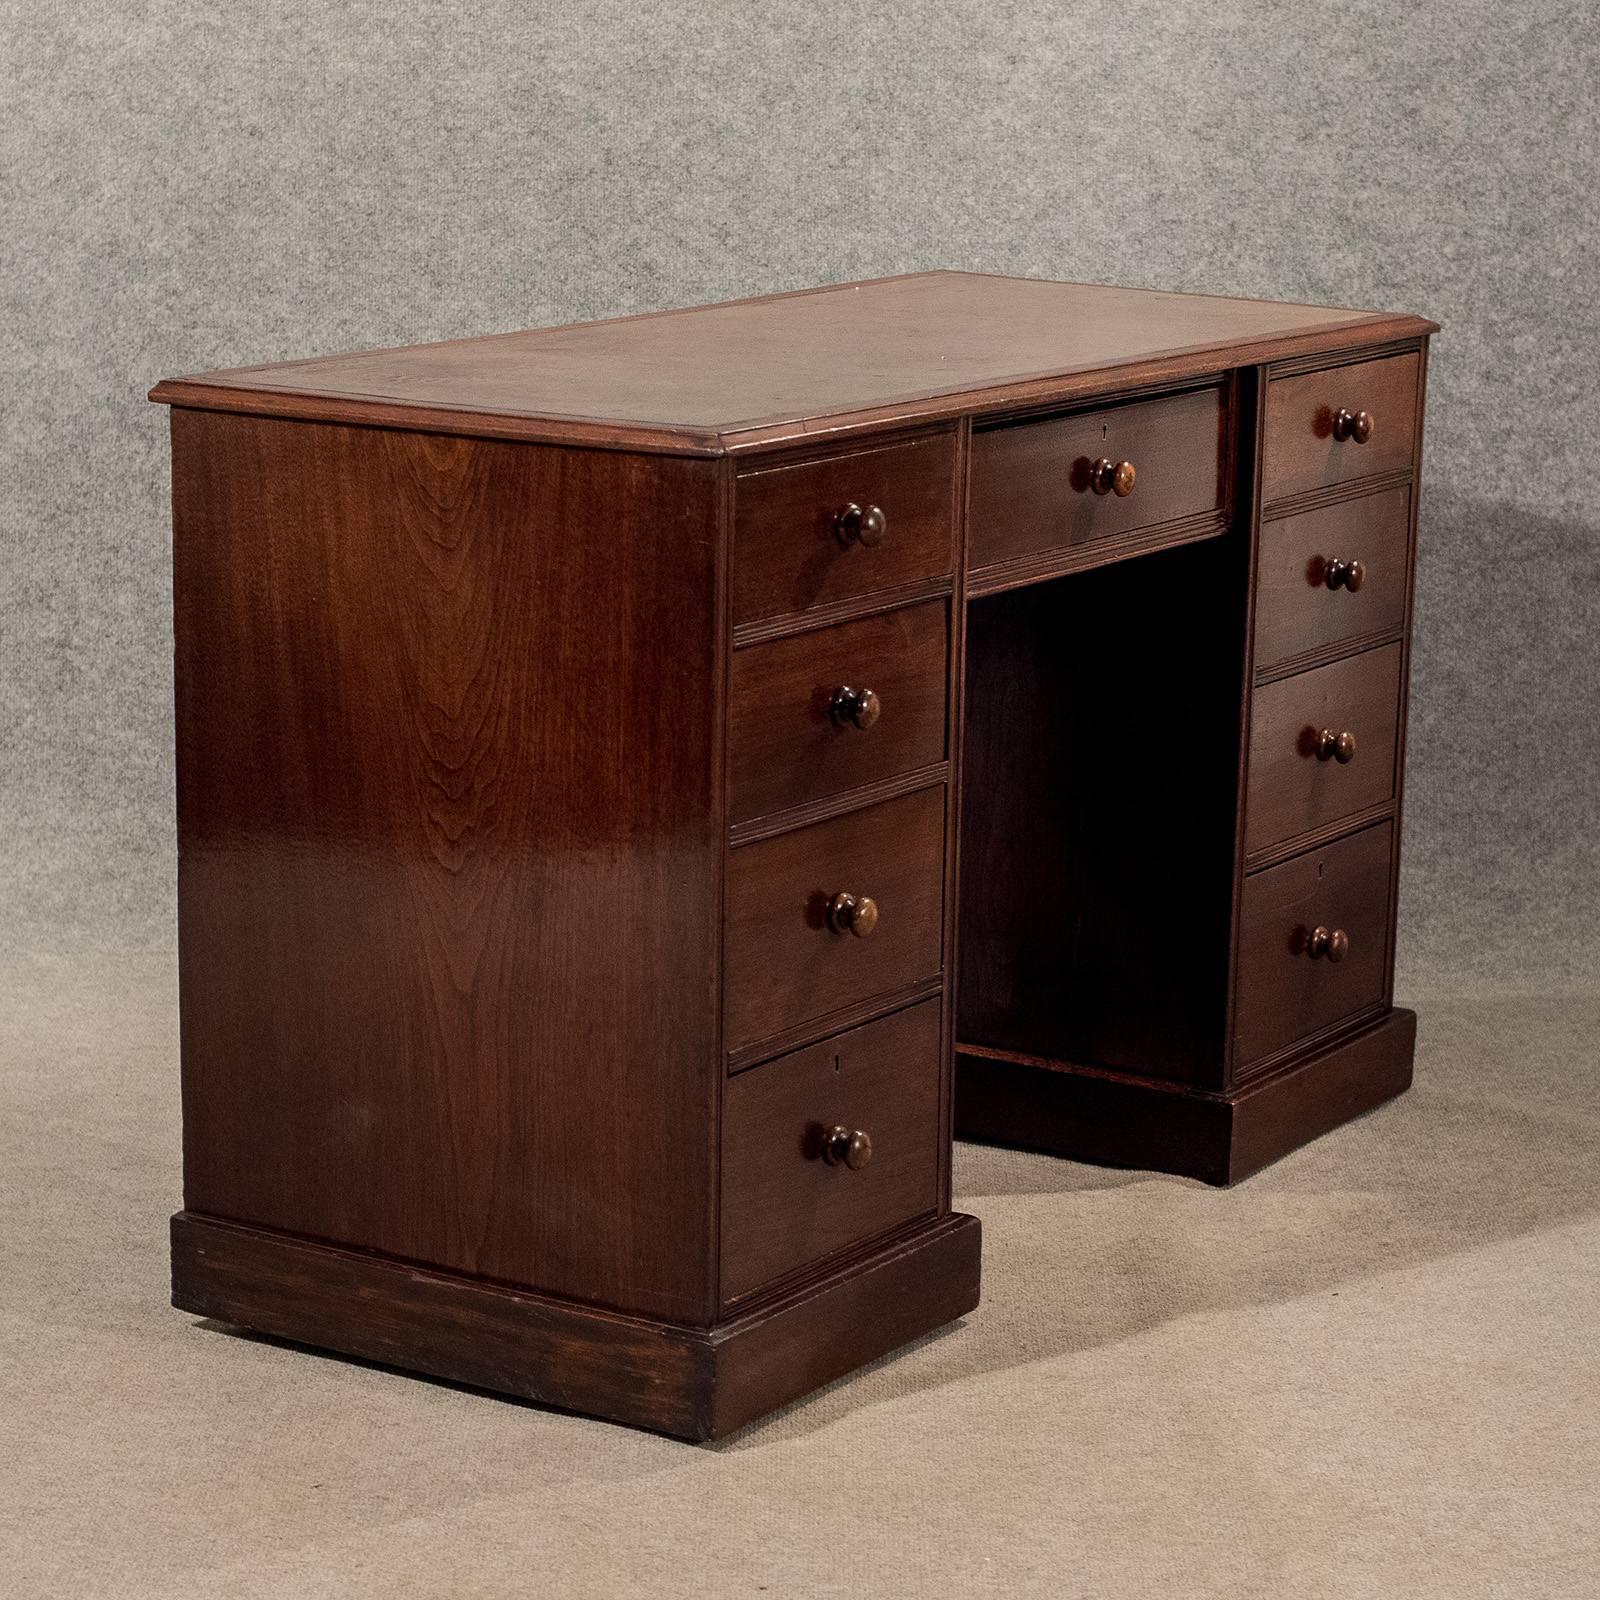 Late 19th Century Antique Writing Study Pedestal Desk Leather Top Victorian Mahogany, circa 1890